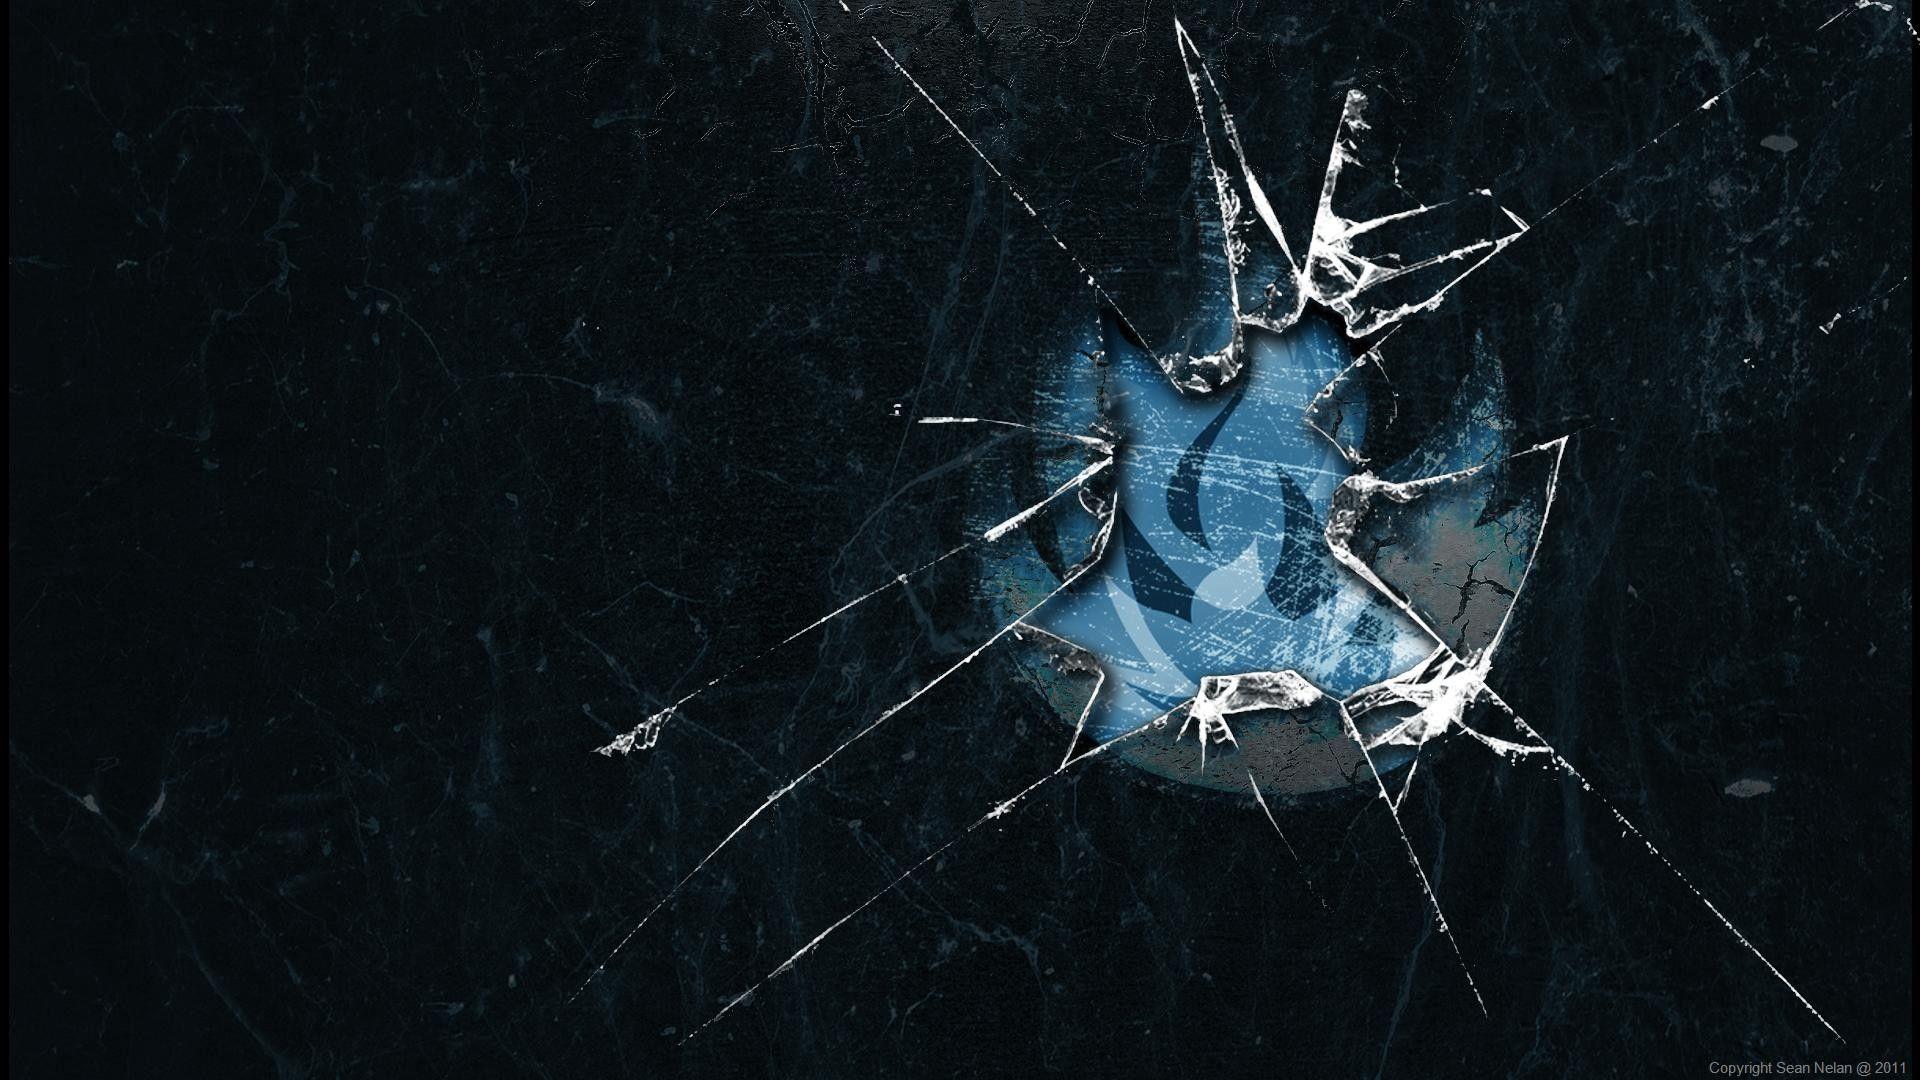 Cracked Screen Wallpaper for Computer